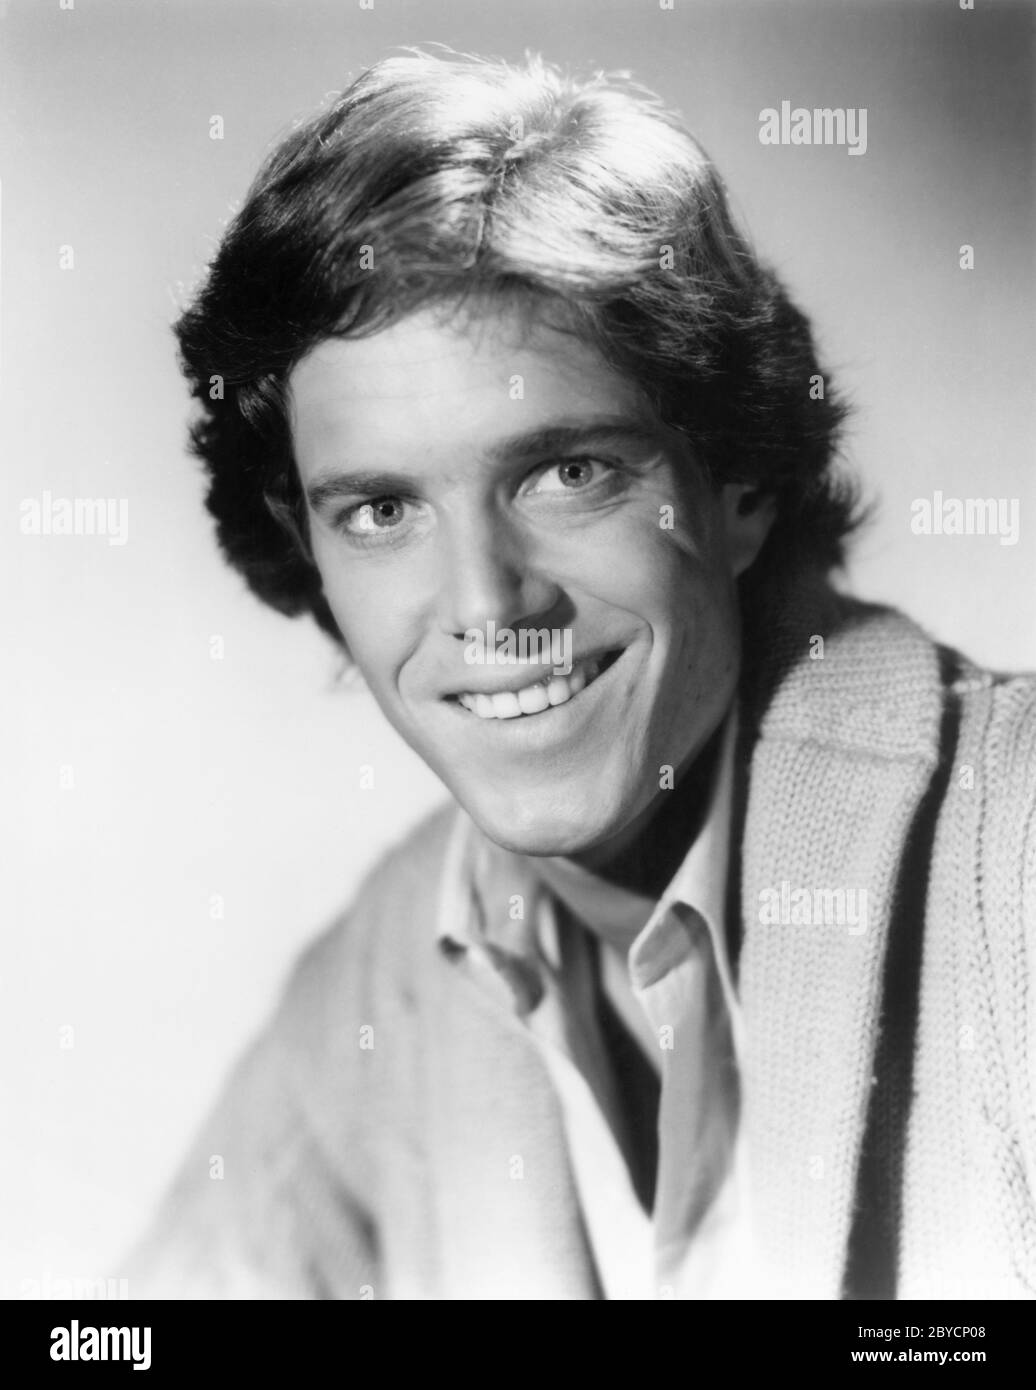 American Actor Richard Bekins, Head and Shoulders Publicity Portrait, early 1980's Stock Photo